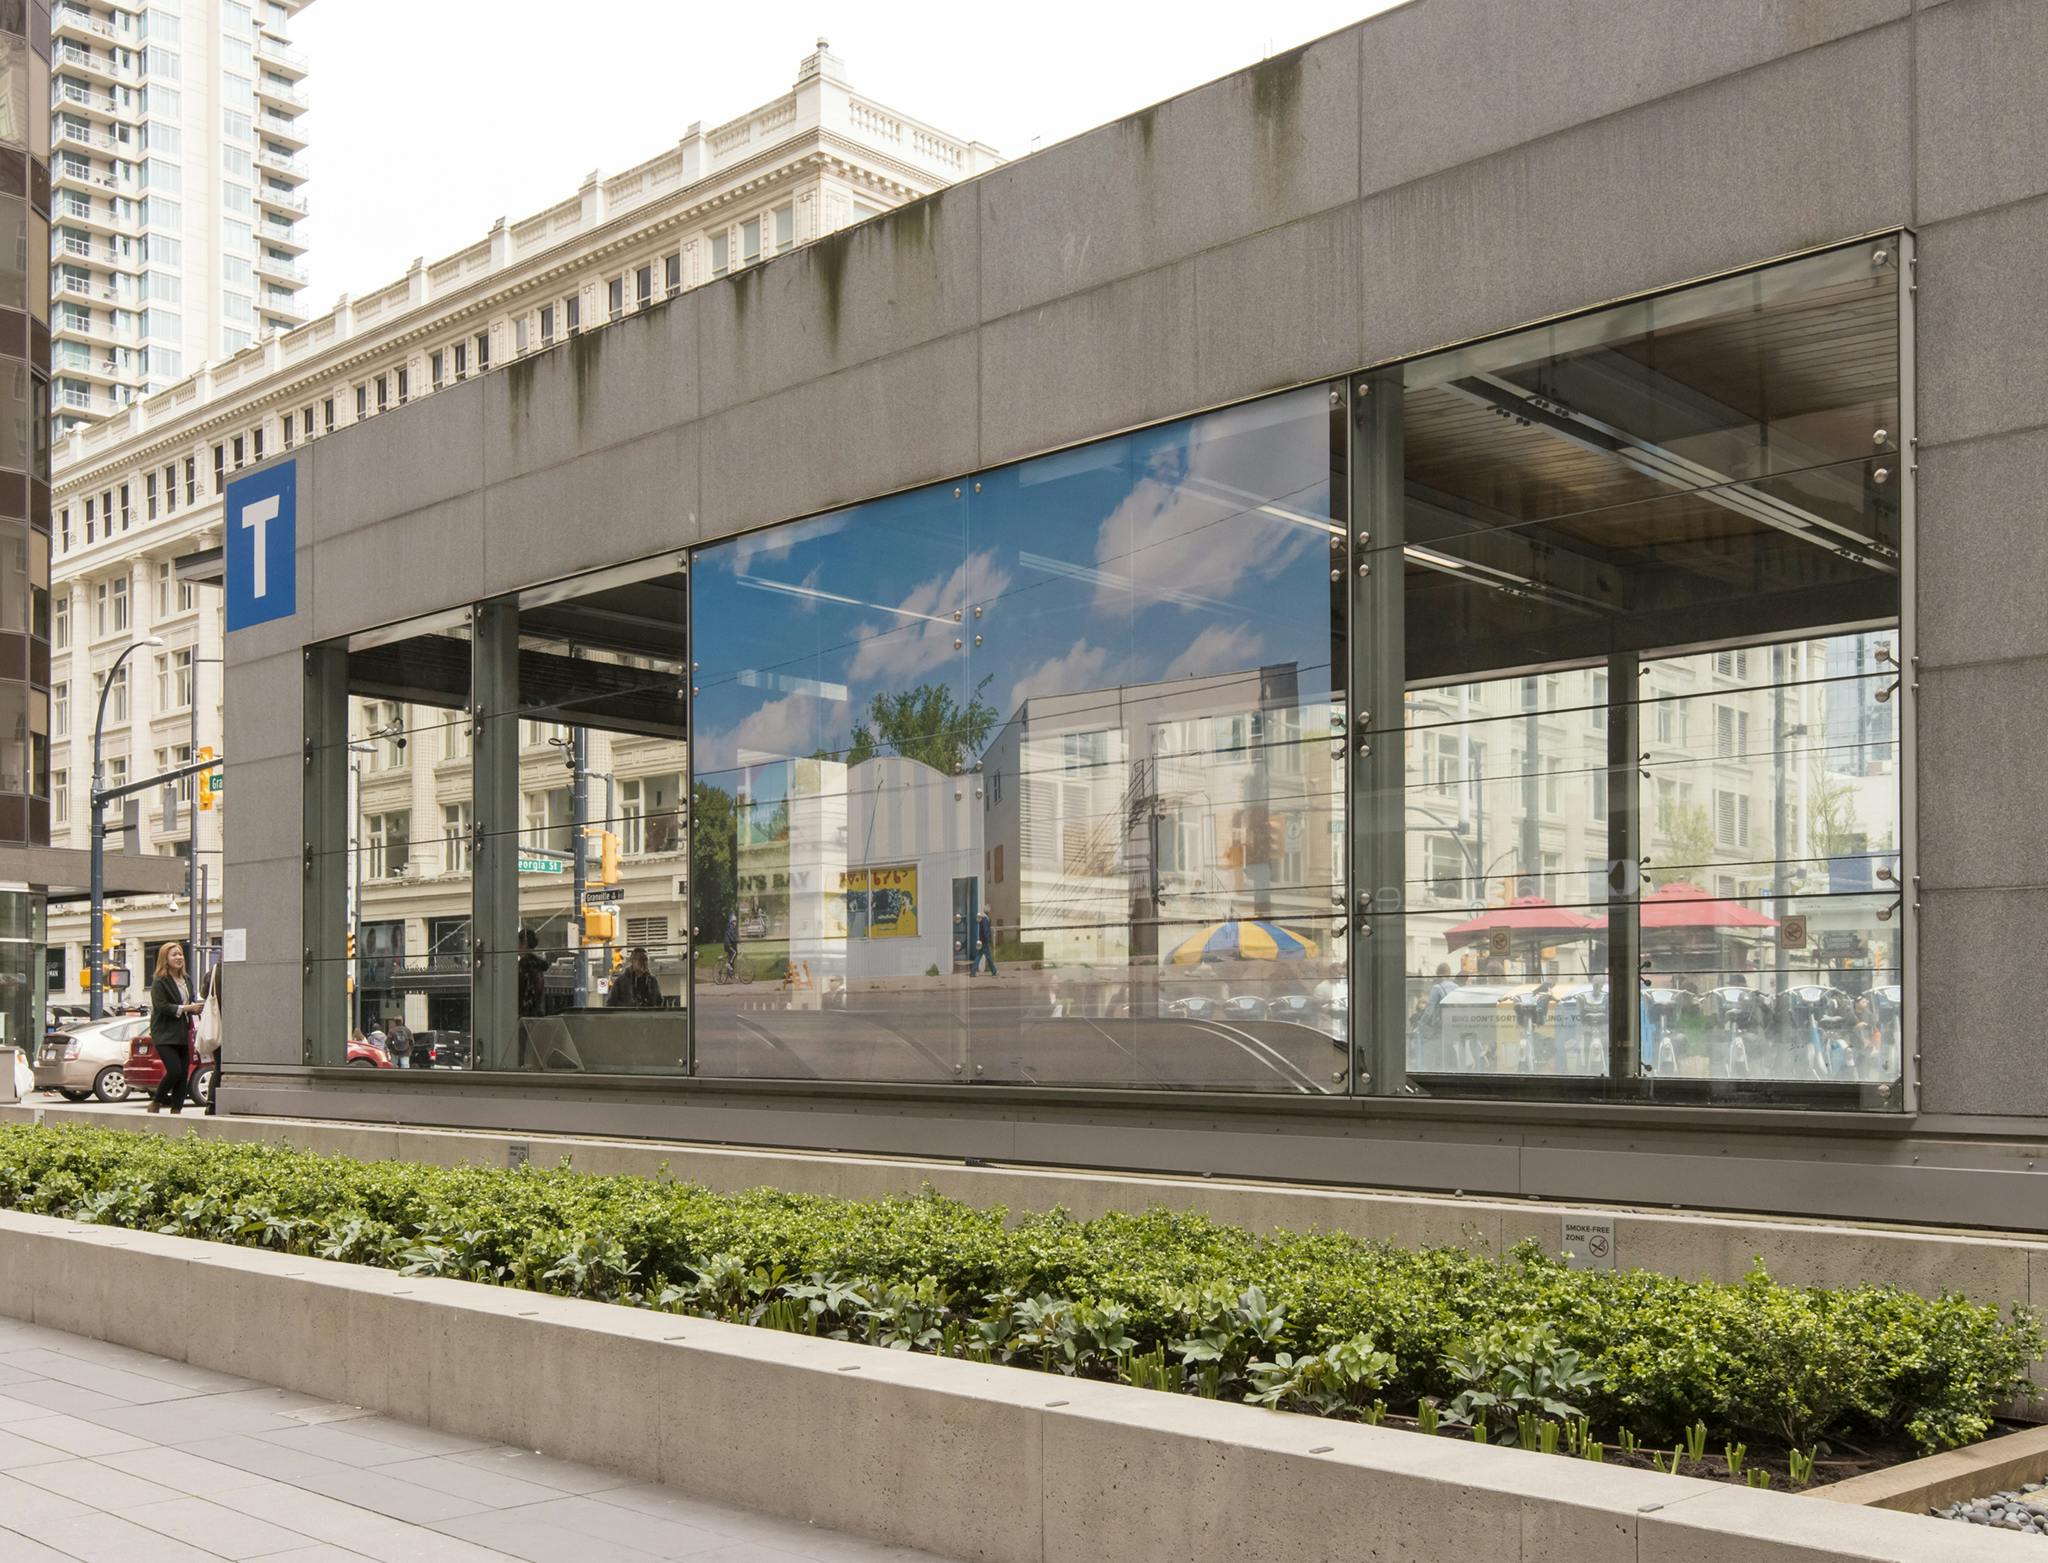 Exterior image of Yaletown Roundhouse Station with a large-scale photograph installed on the facade. The photograph depicts a small-town Saskatchewan streetscape with its signage in Cree syllabics.